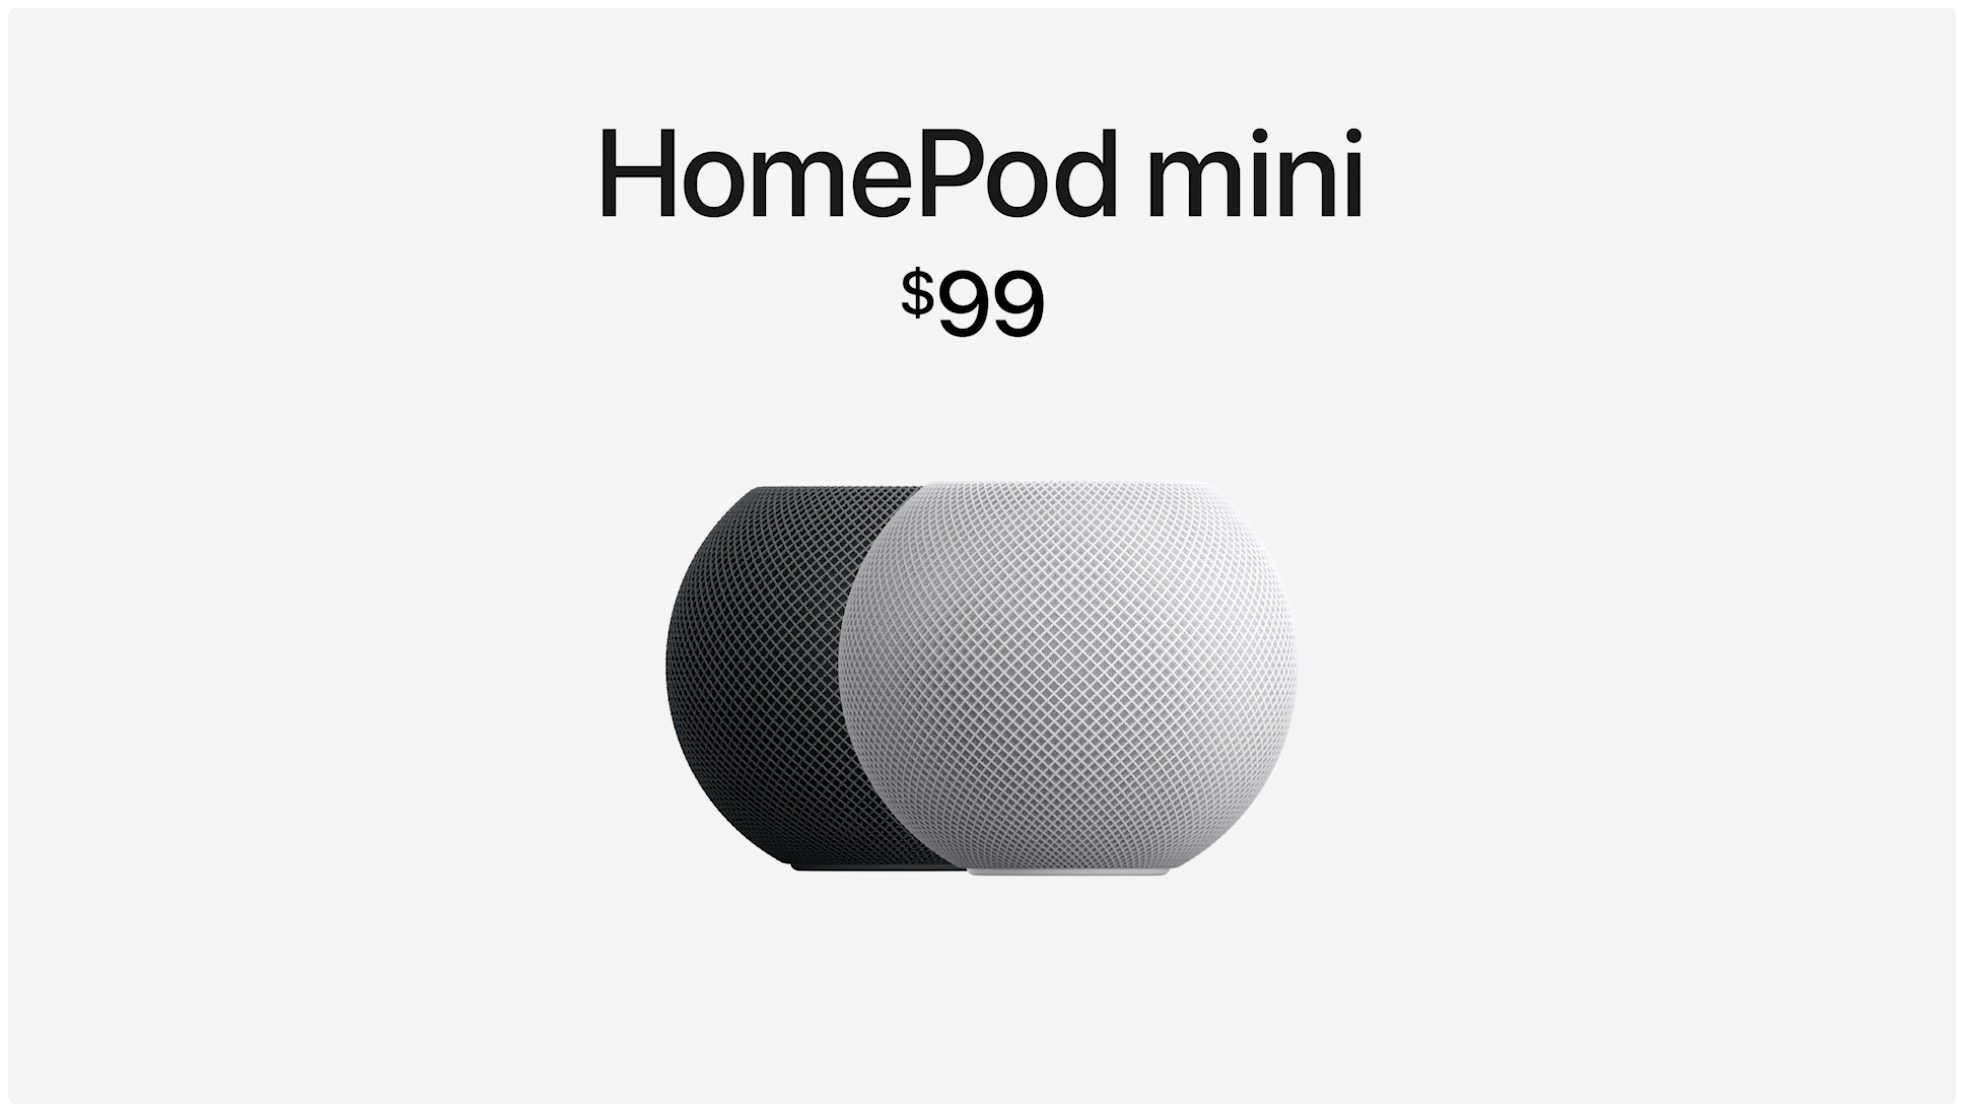 This is the HomePod mini